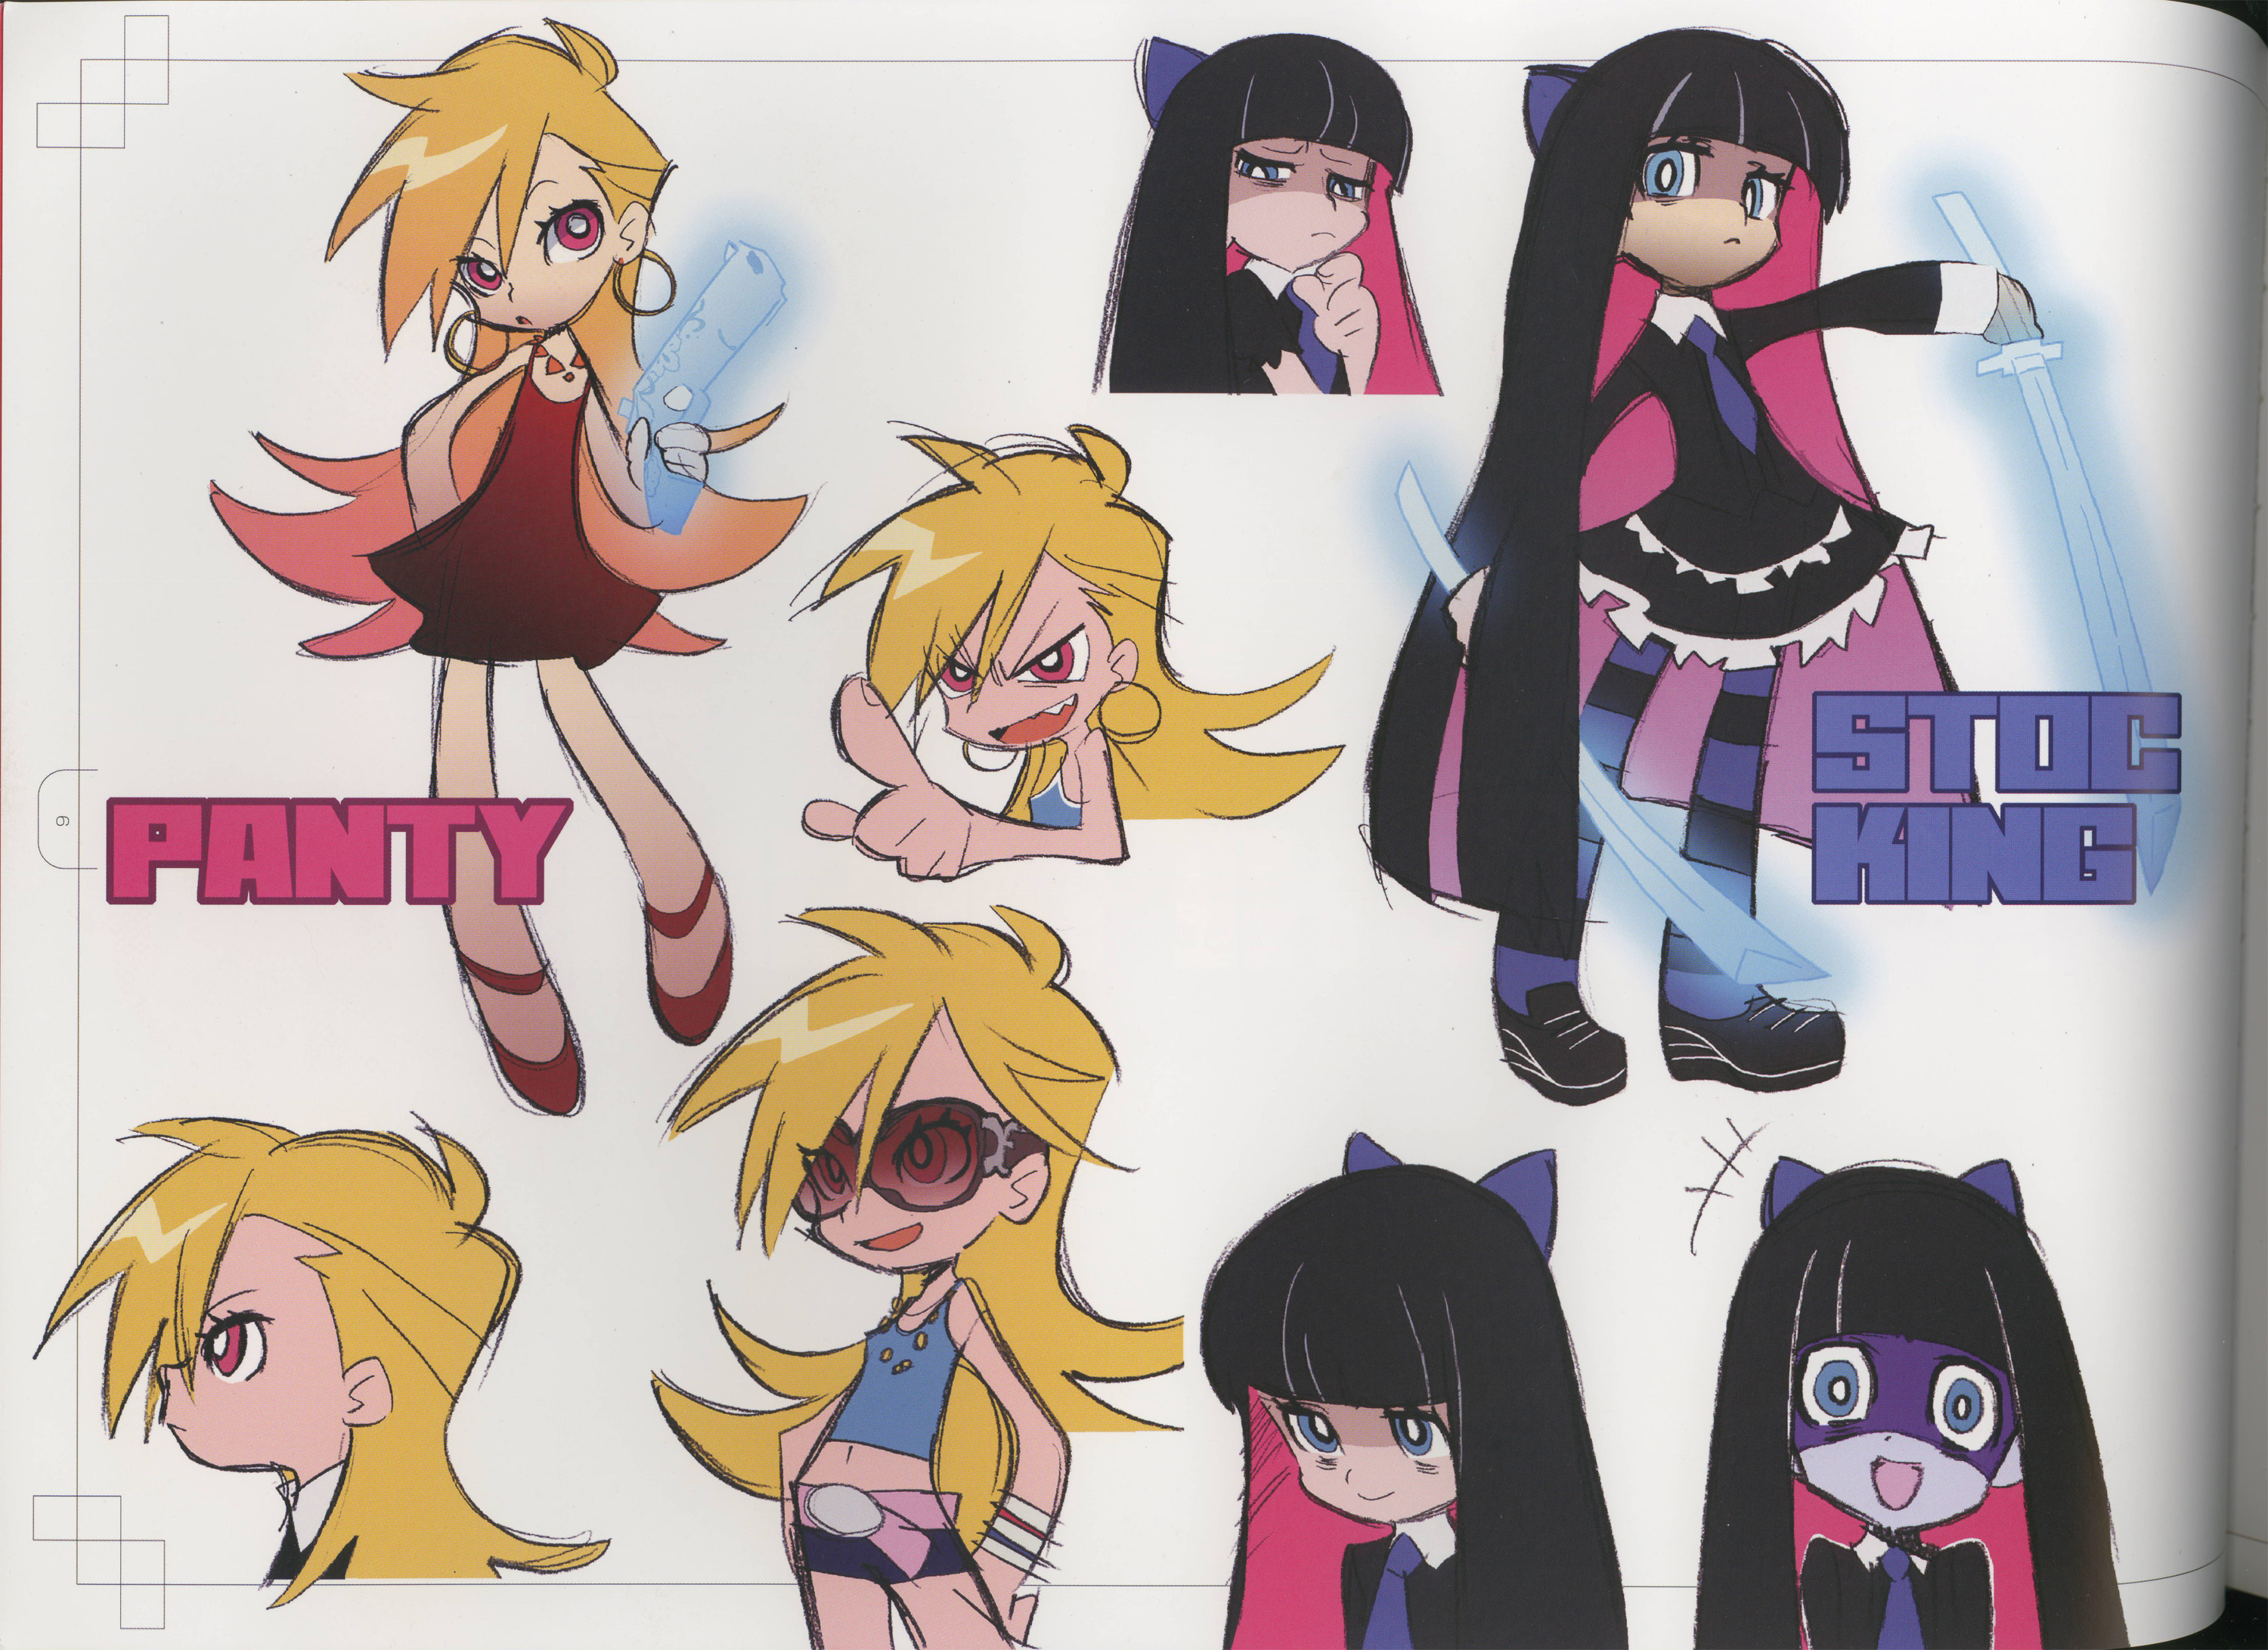 Artbook: Art of Panty and Stocking with Garterbelt vol. 1.